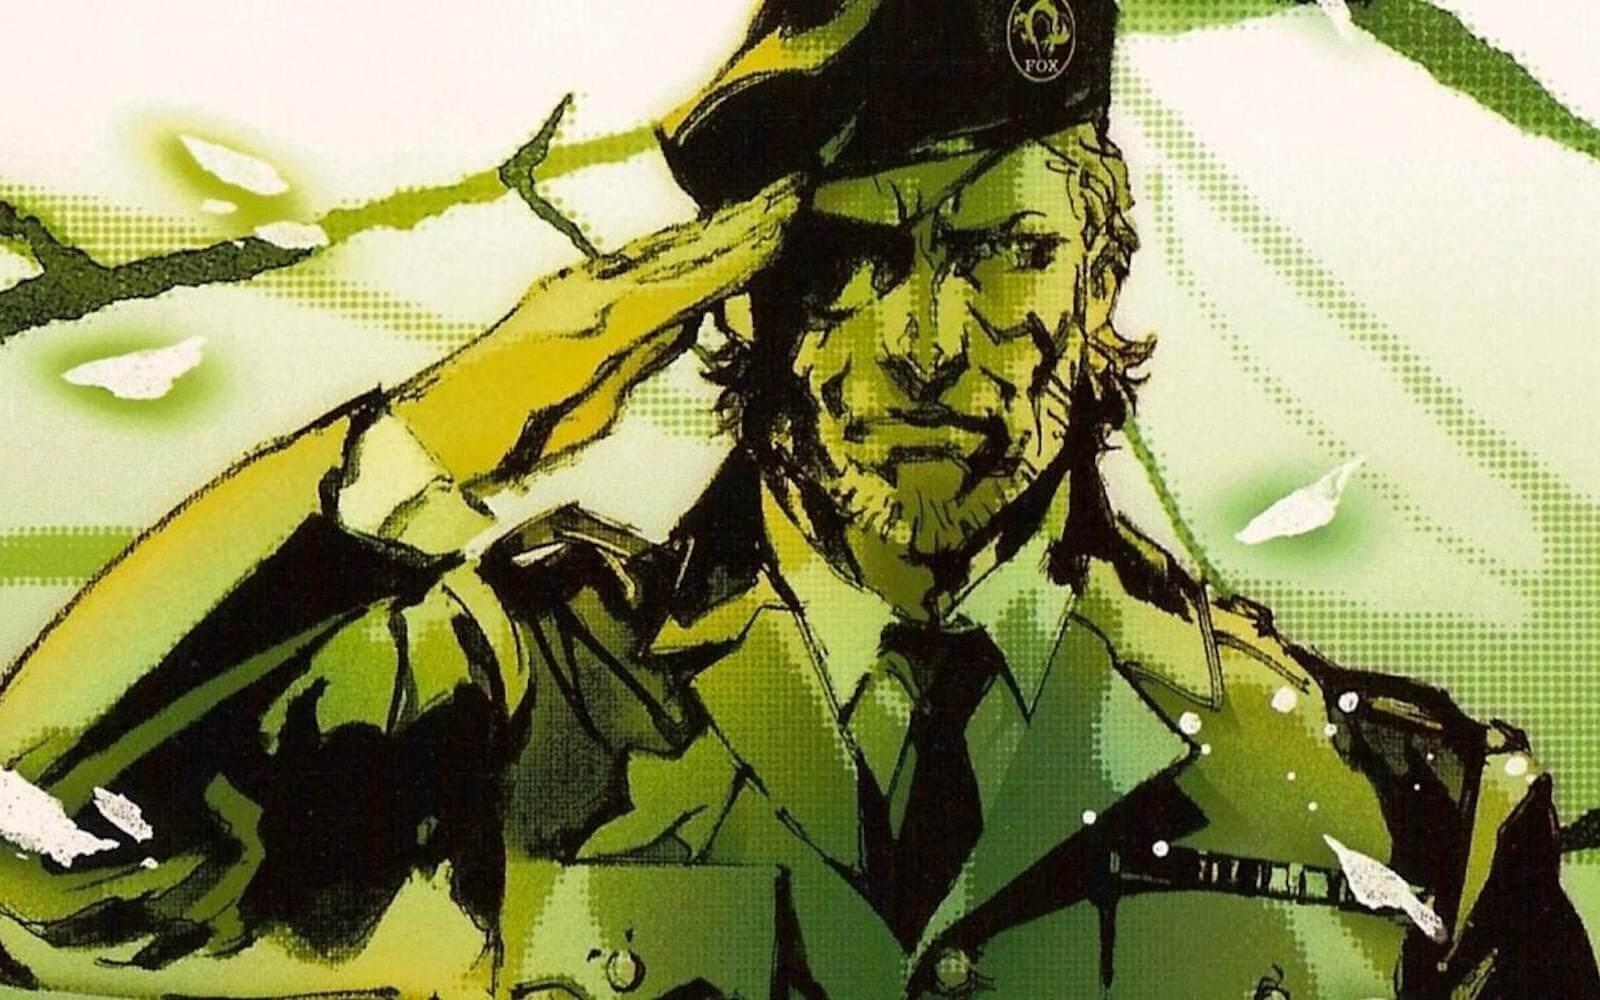 Metal Gear Solid 4: Guns of the Patriots - The Cane and Rinse podcast